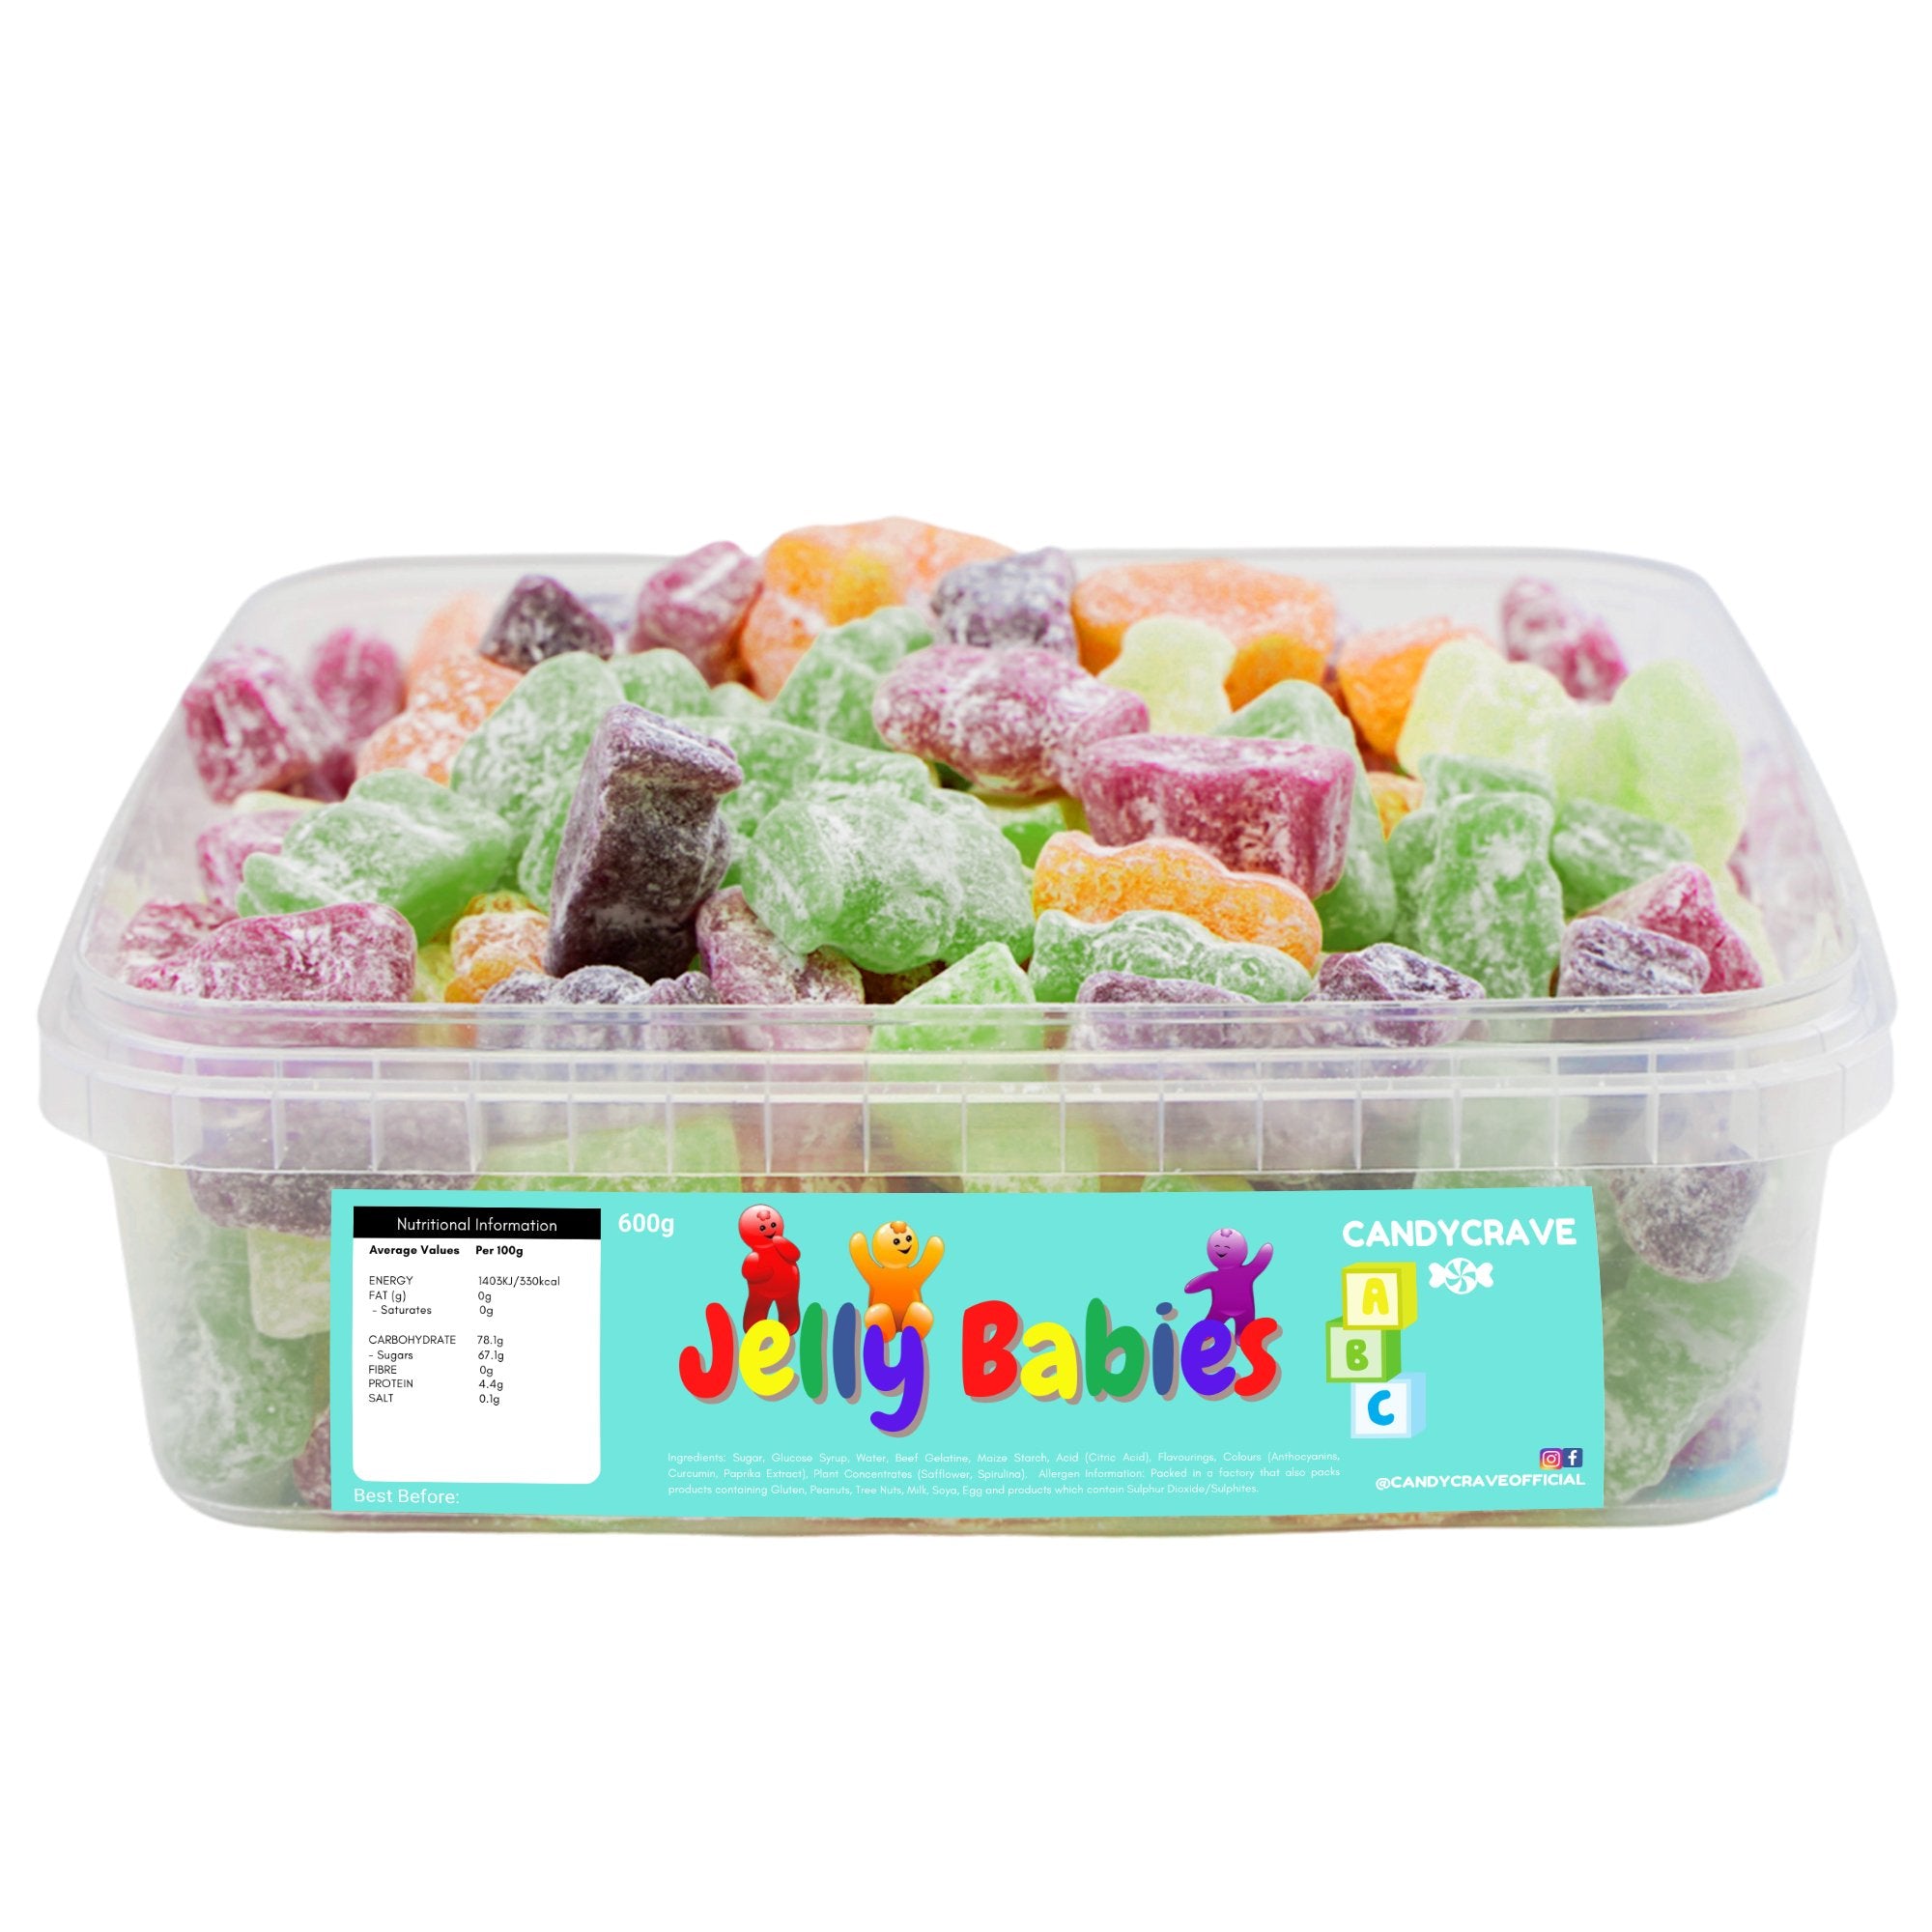 Candy Crave Jelly Babies Tub 600g - Jessica's Sweets